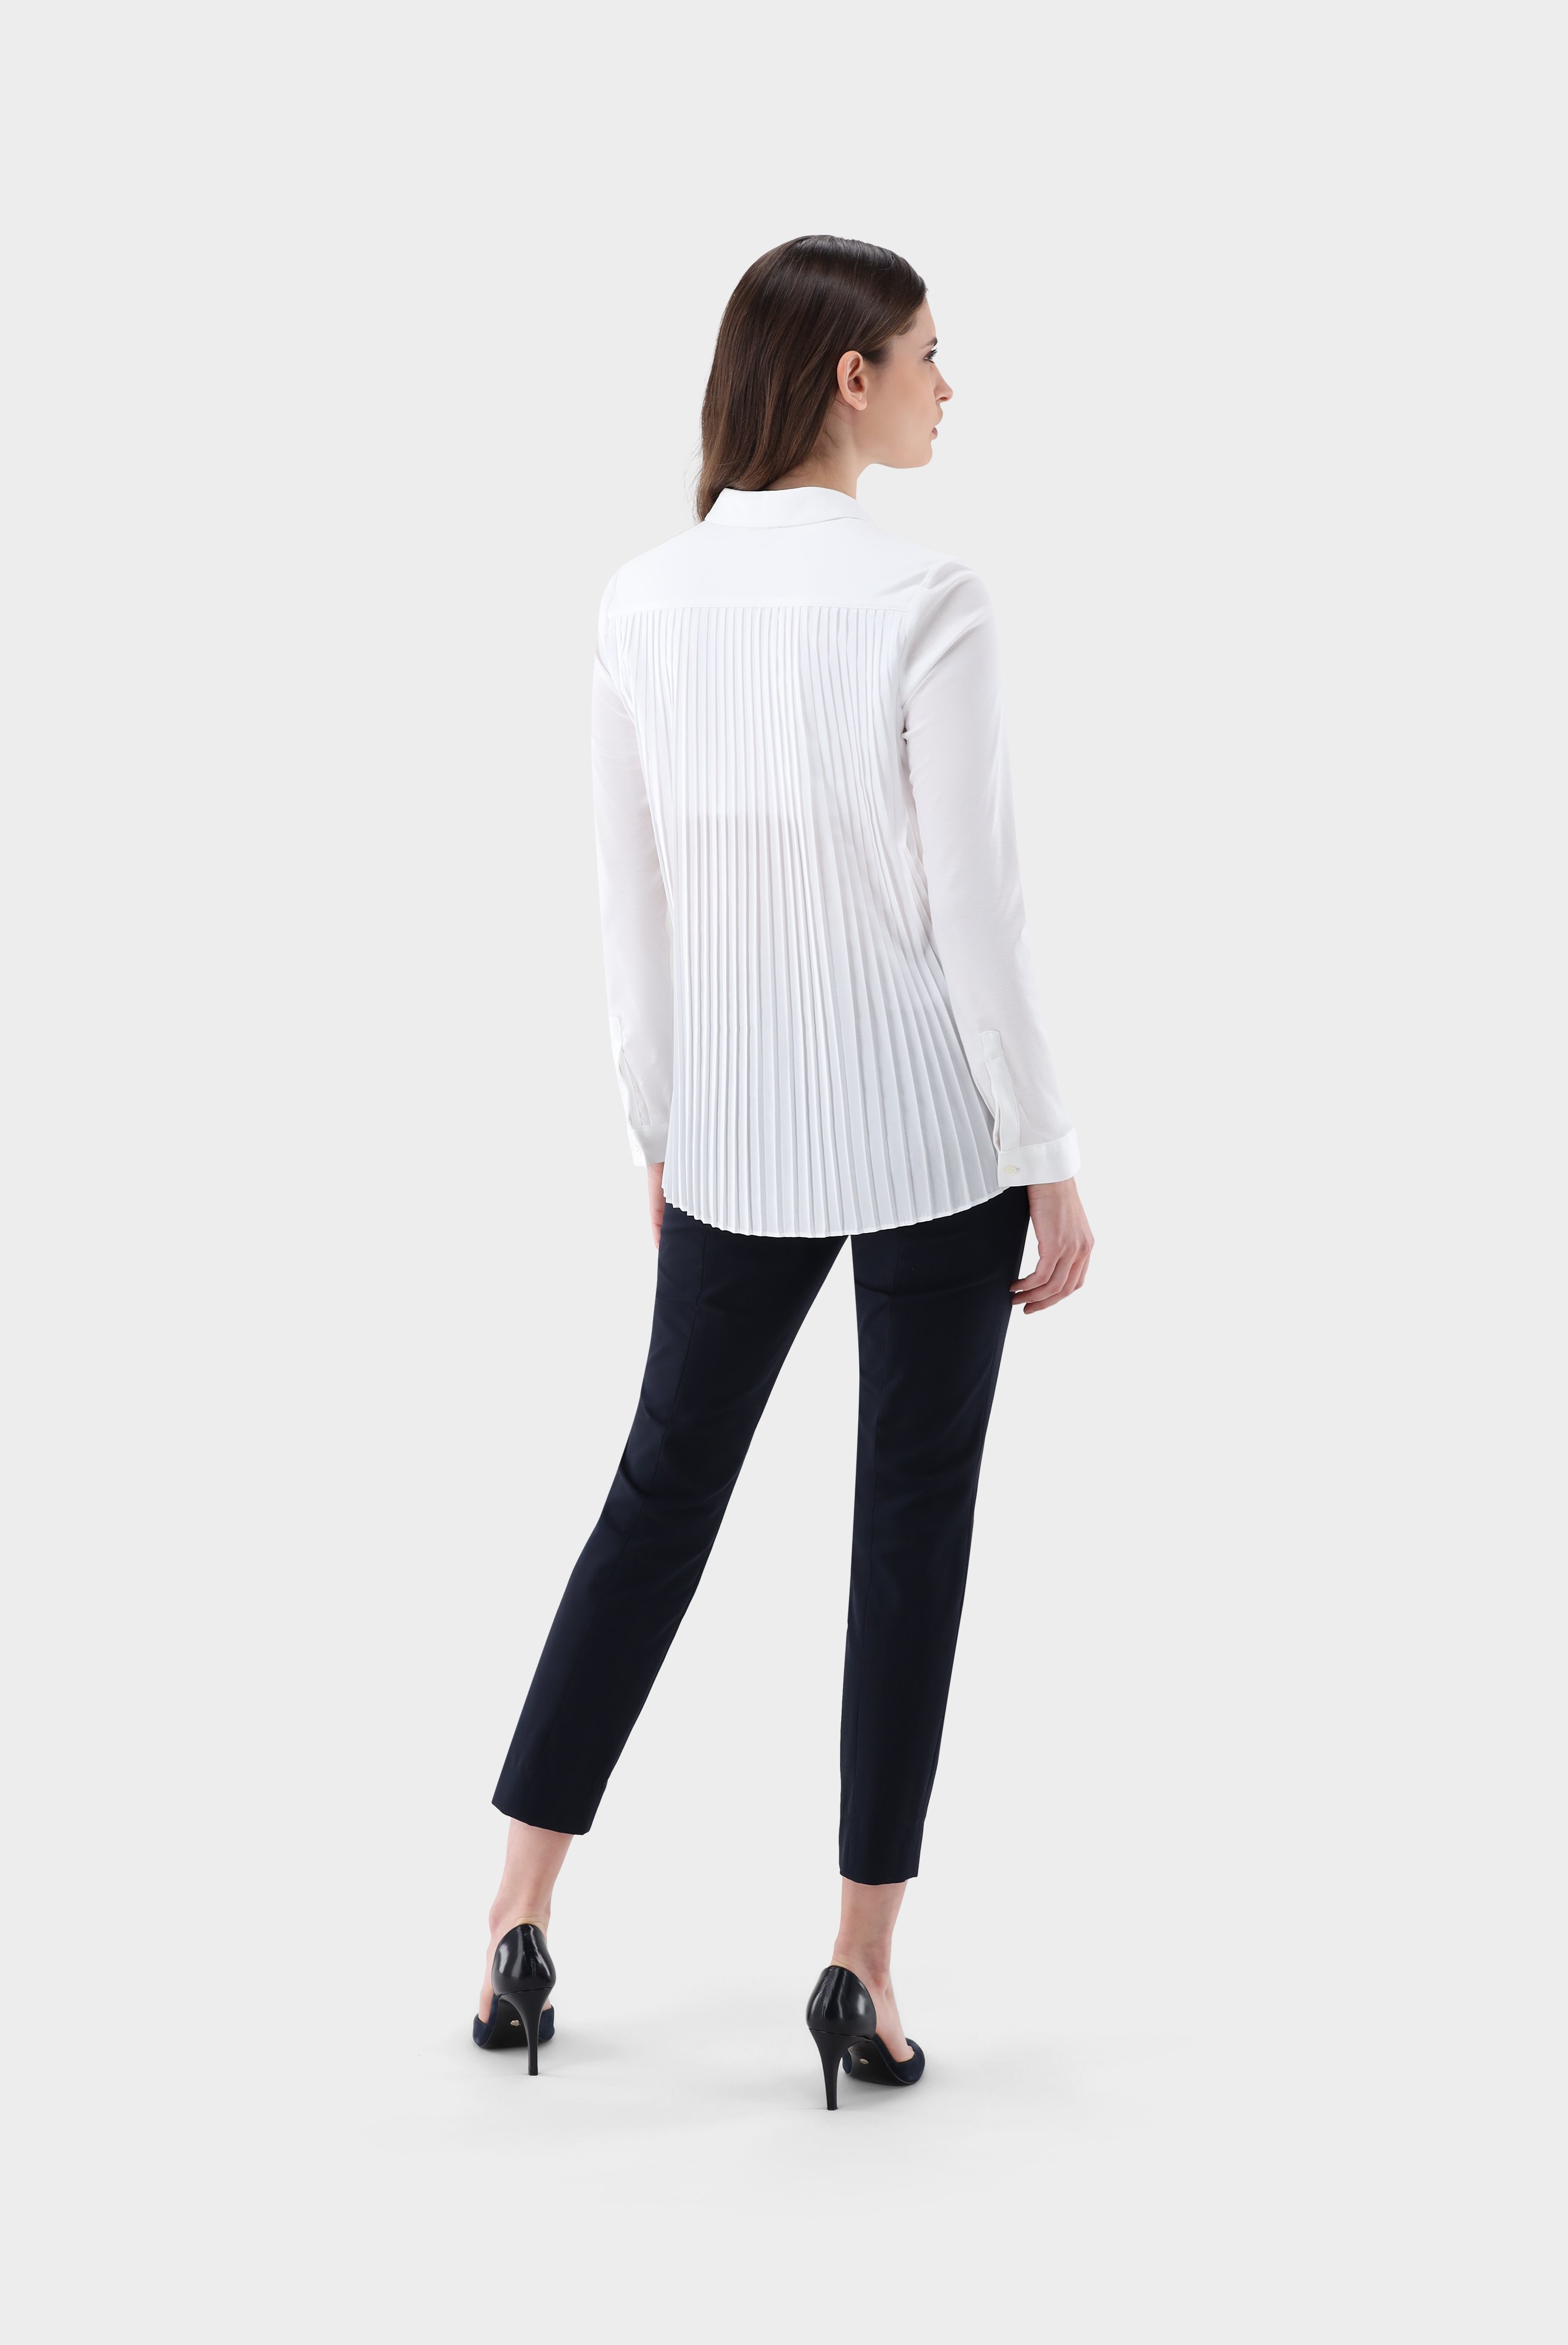 Jersey Blouses+Swiss Cotton Blouse with Pleated Back+05.6703.18.180031.000.46